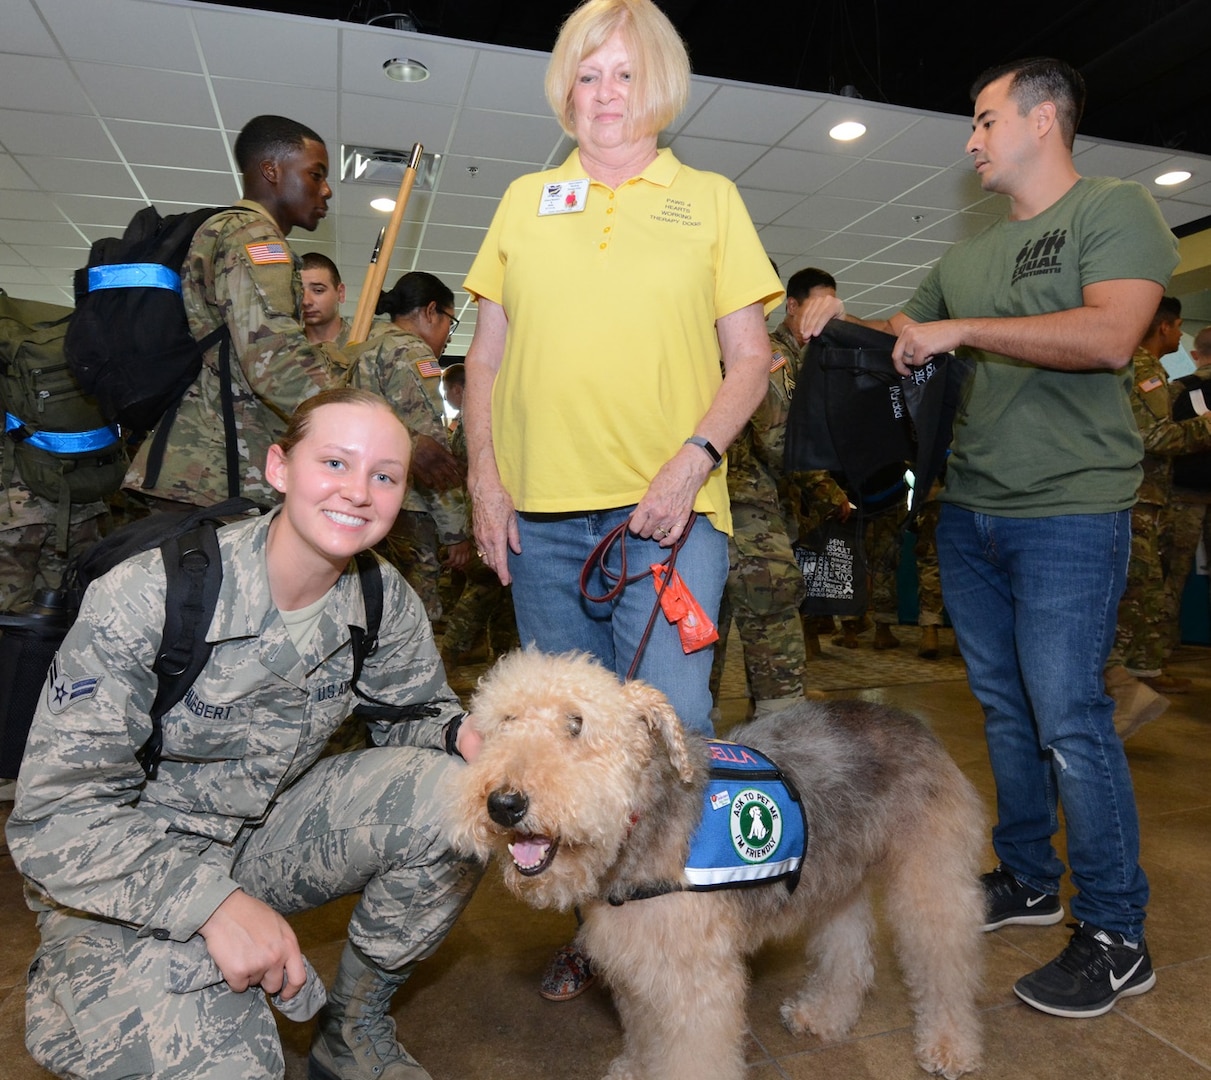 An Airman poses for a photo with a working therapy dog brought by volunteers with Paws 4 Hearts.